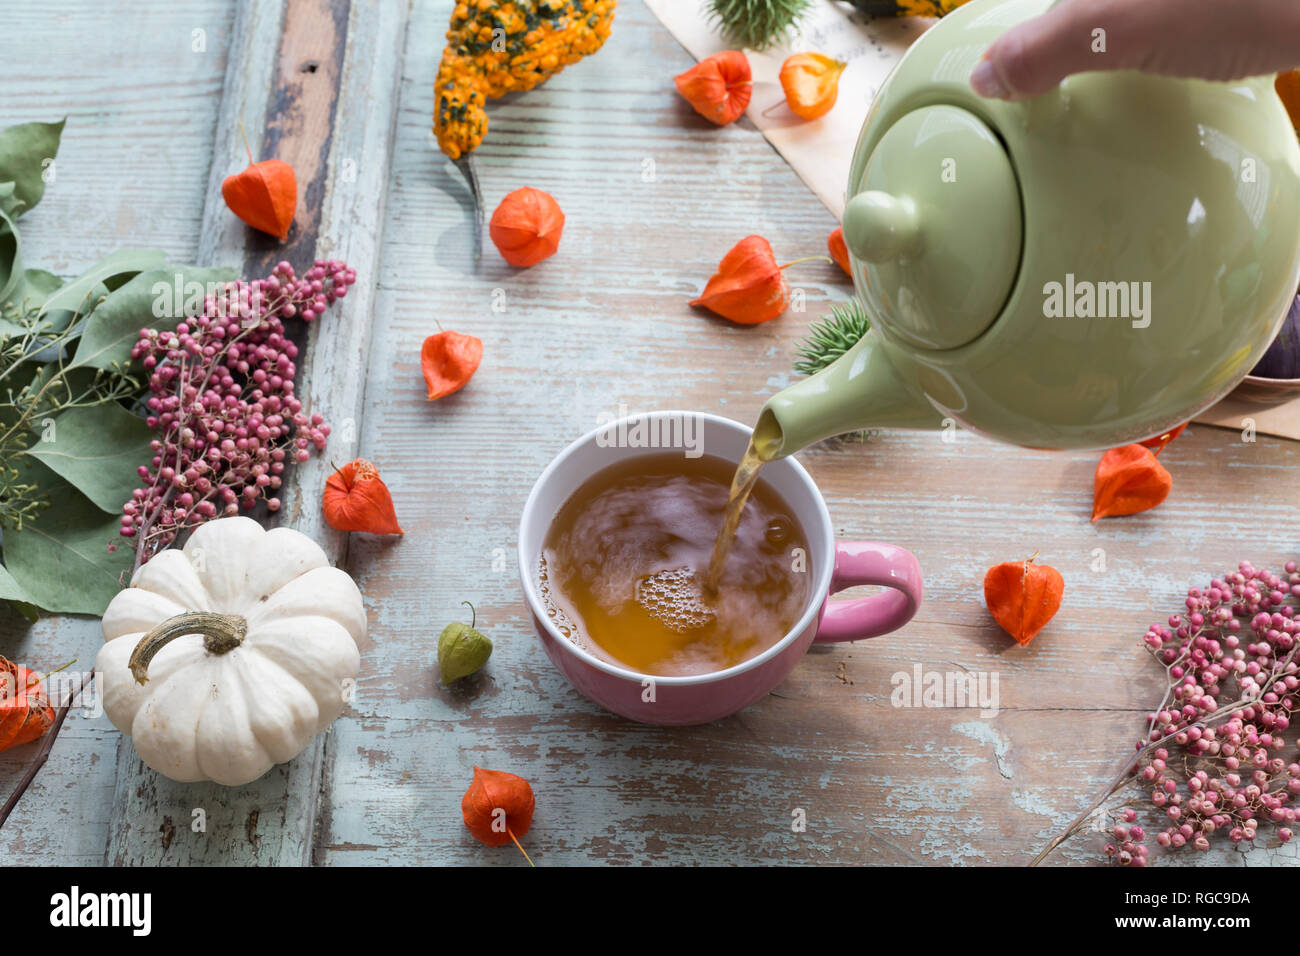 Woman's hand pouring tea in a cup Stock Photo